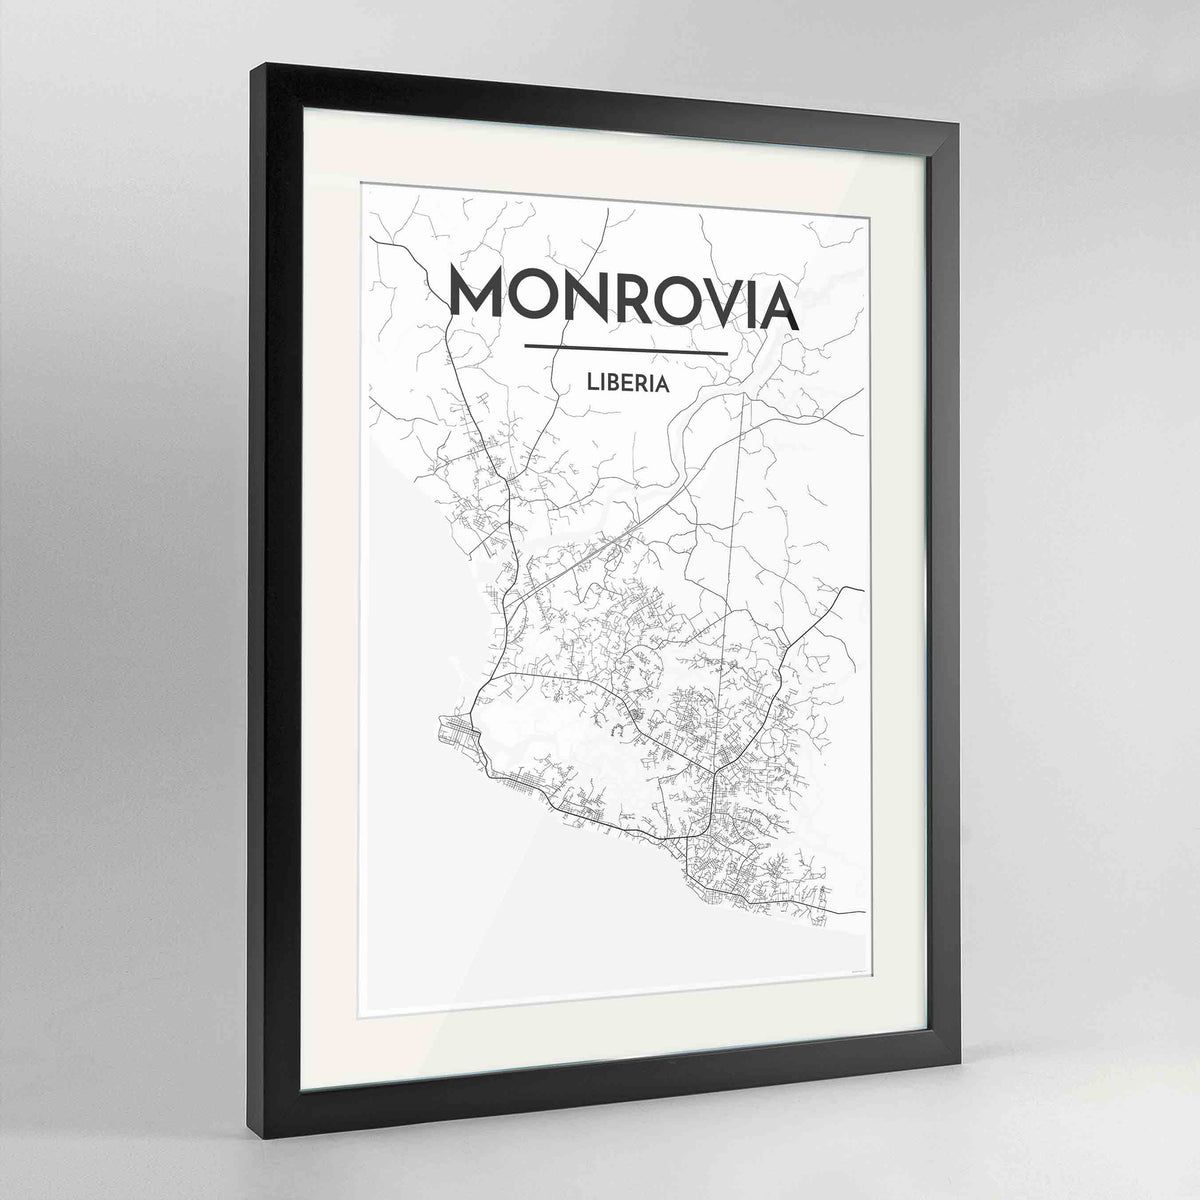 Framed Monrovia Map Art Print 24x36&quot; Contemporary Black frame Point Two Design Group